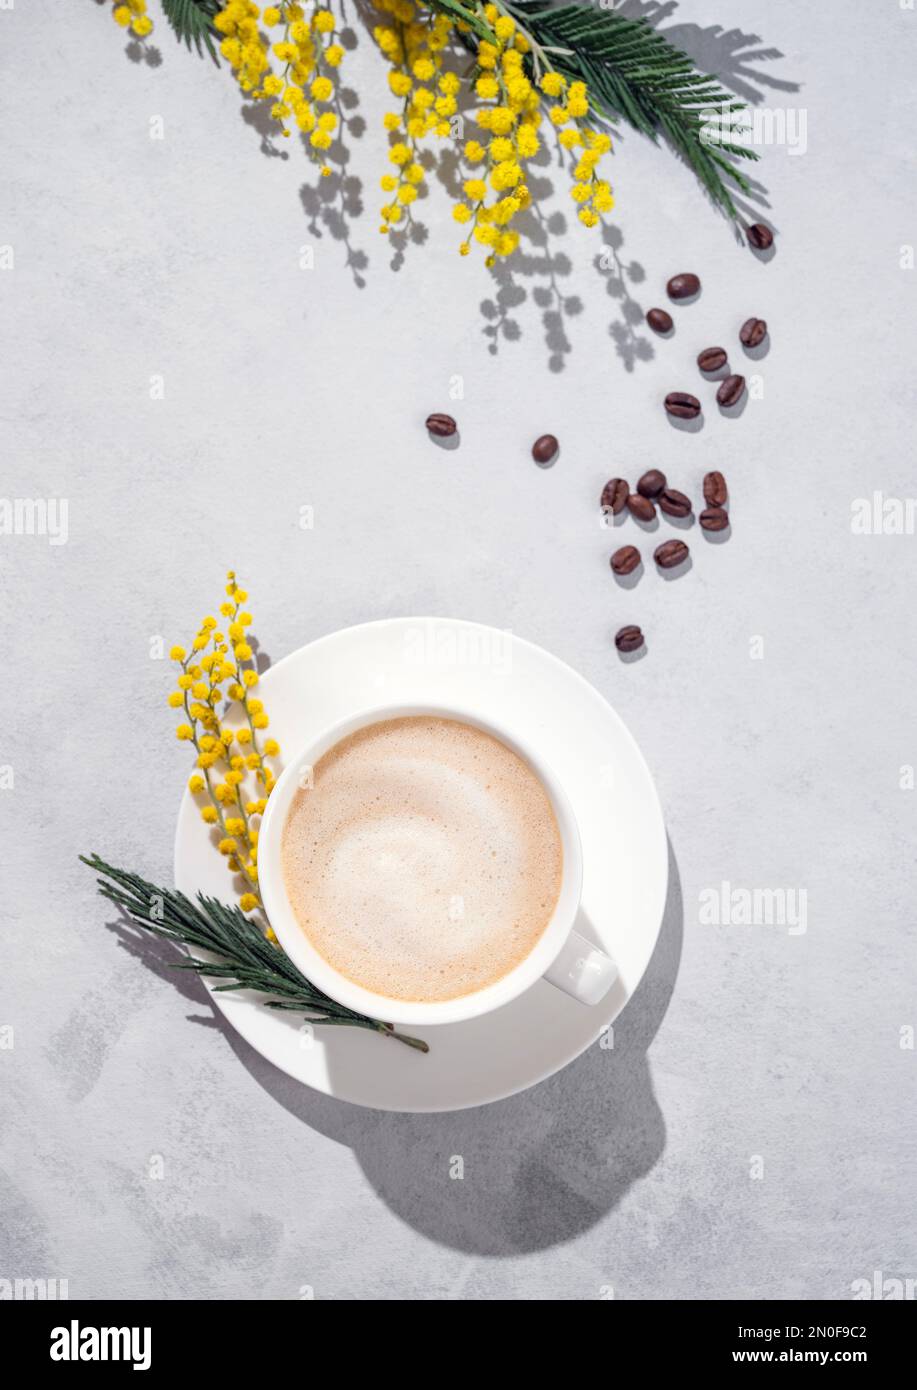 Cappuccino or latte with milk foam in a white cup on a light blue background with coffee beans and yellow mimosa flowers. Top view and copy space. Stock Photo